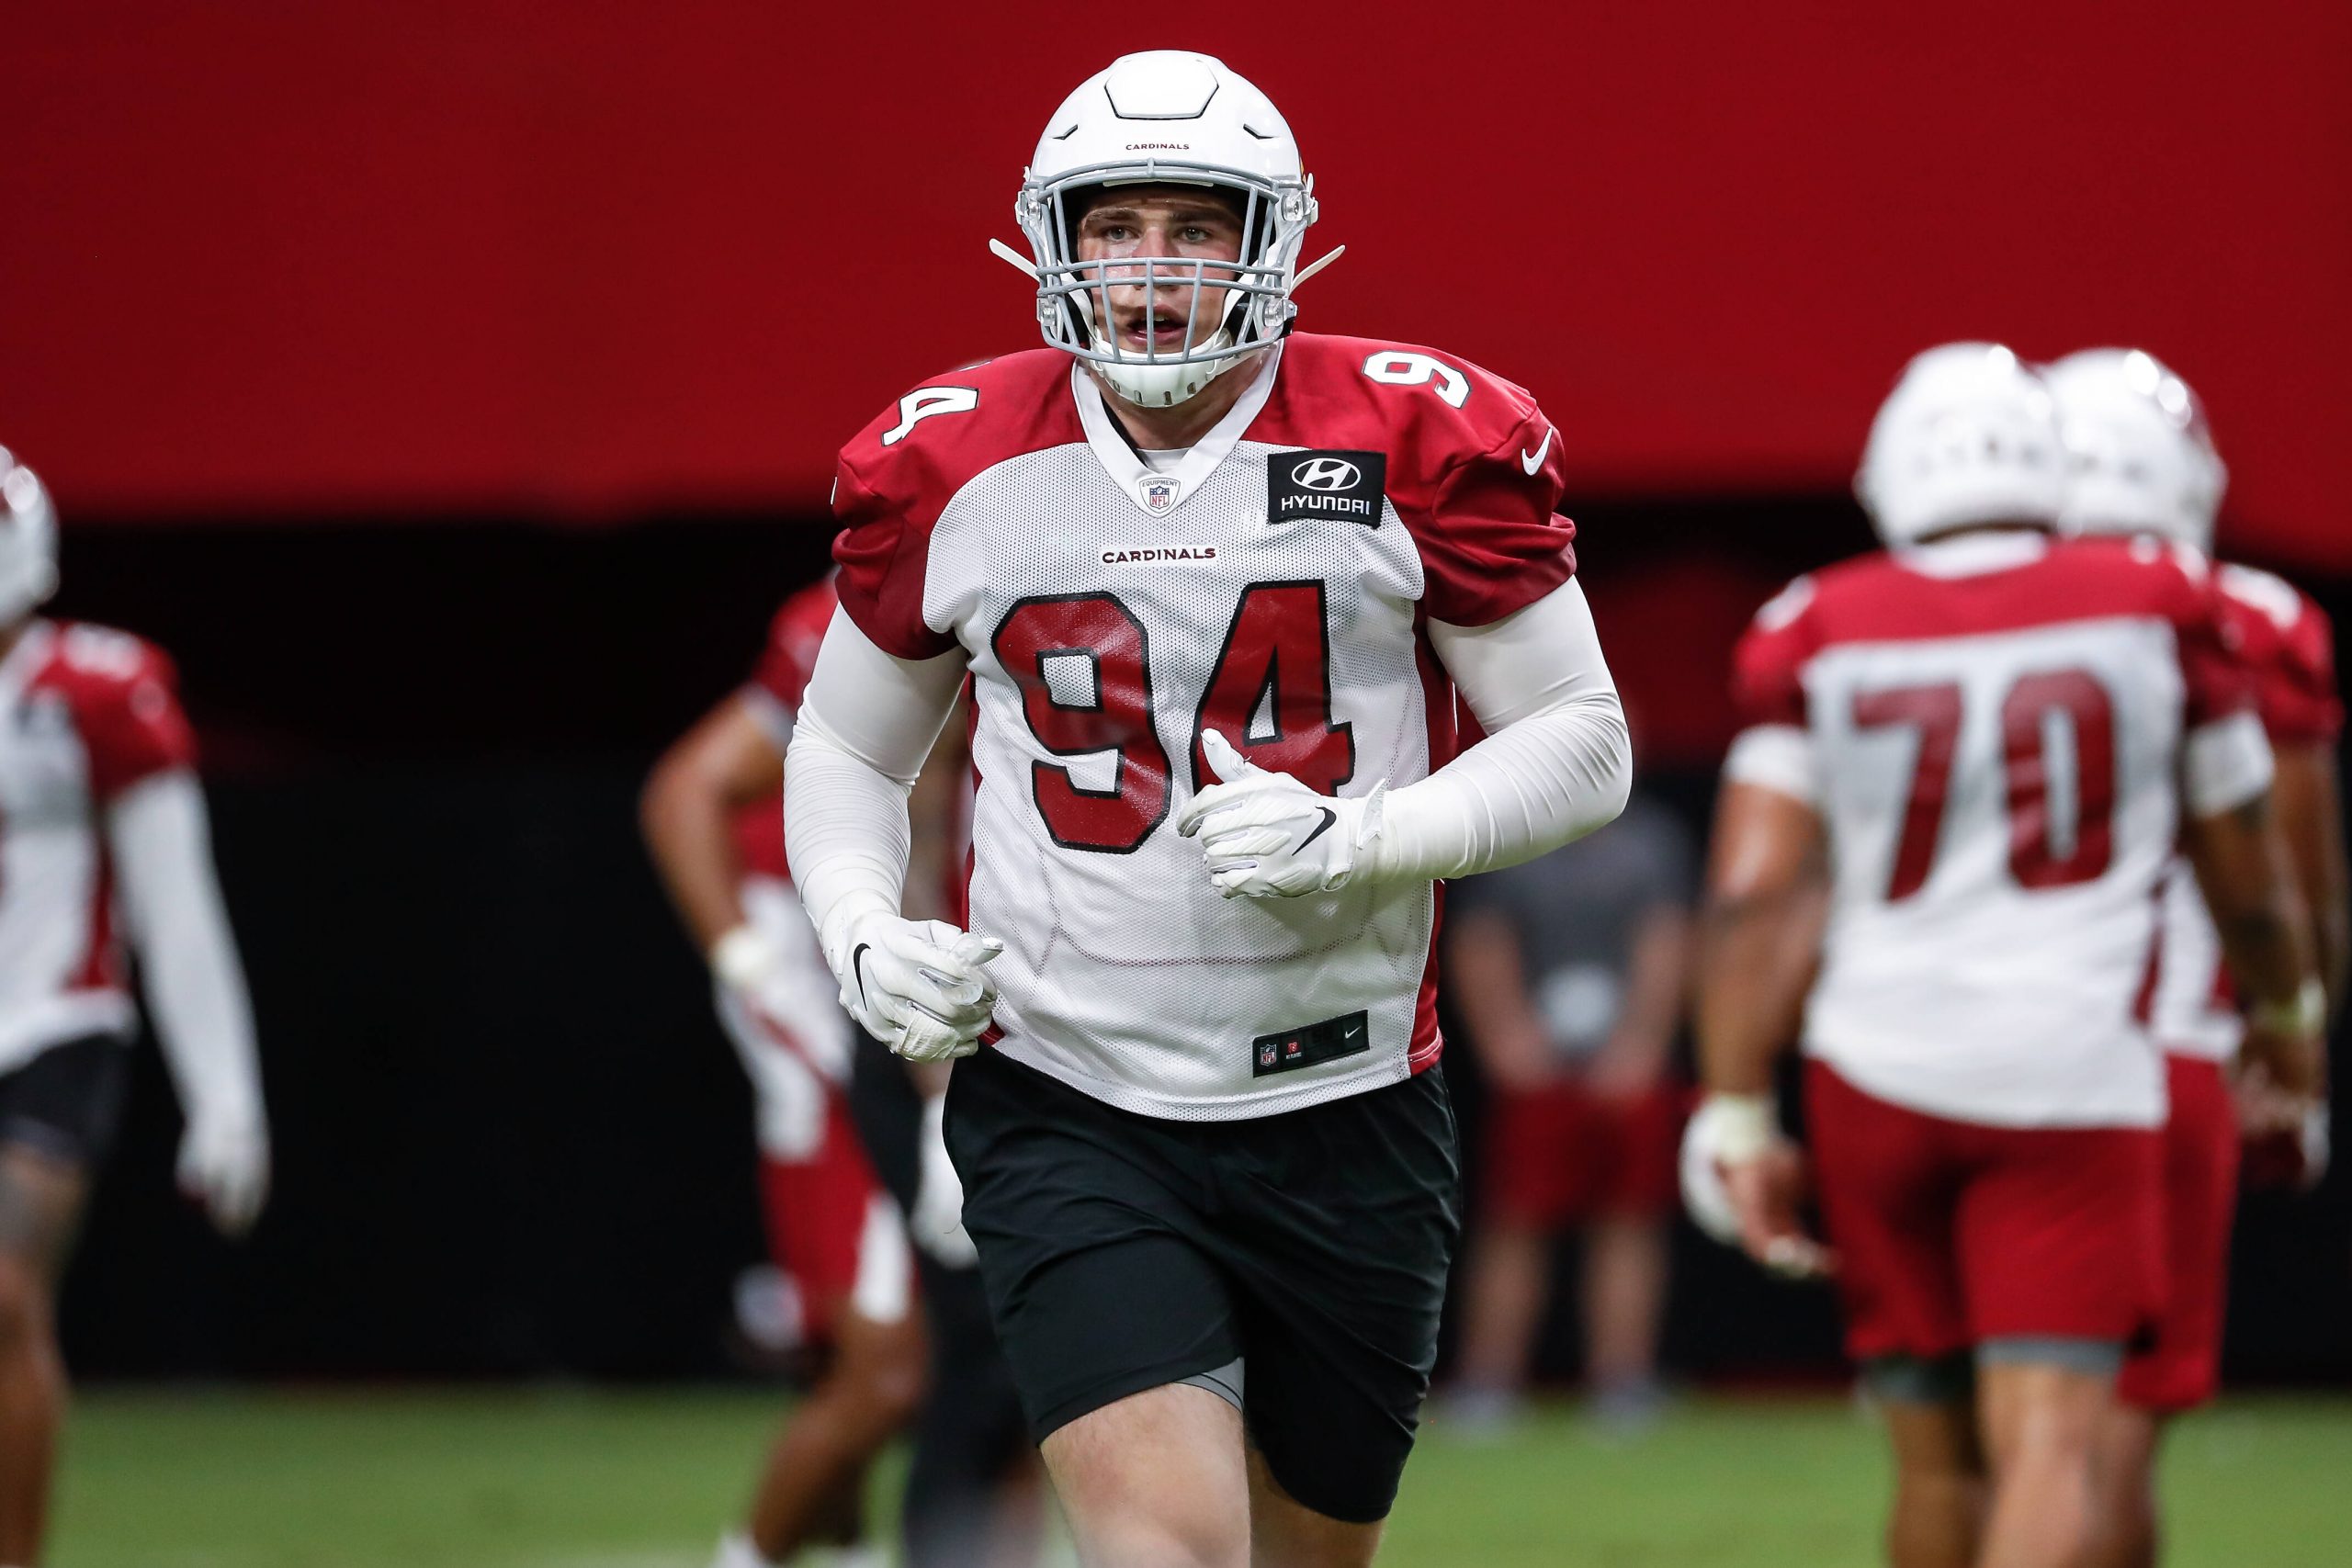 GLENDALE, AZ - JULY 30: Arizona Cardinals defensive end Zach Allen 94 runs to the sideline during Arizona Cardinals training camp on July 30, 2021 at State Farm Stadium in Glendale, Arizona Photo by Kevin Abele/Icon Sportswire NFL, American Football Herren, USA JUL 30 Arizona Cardinals Training Camp Icon210730097